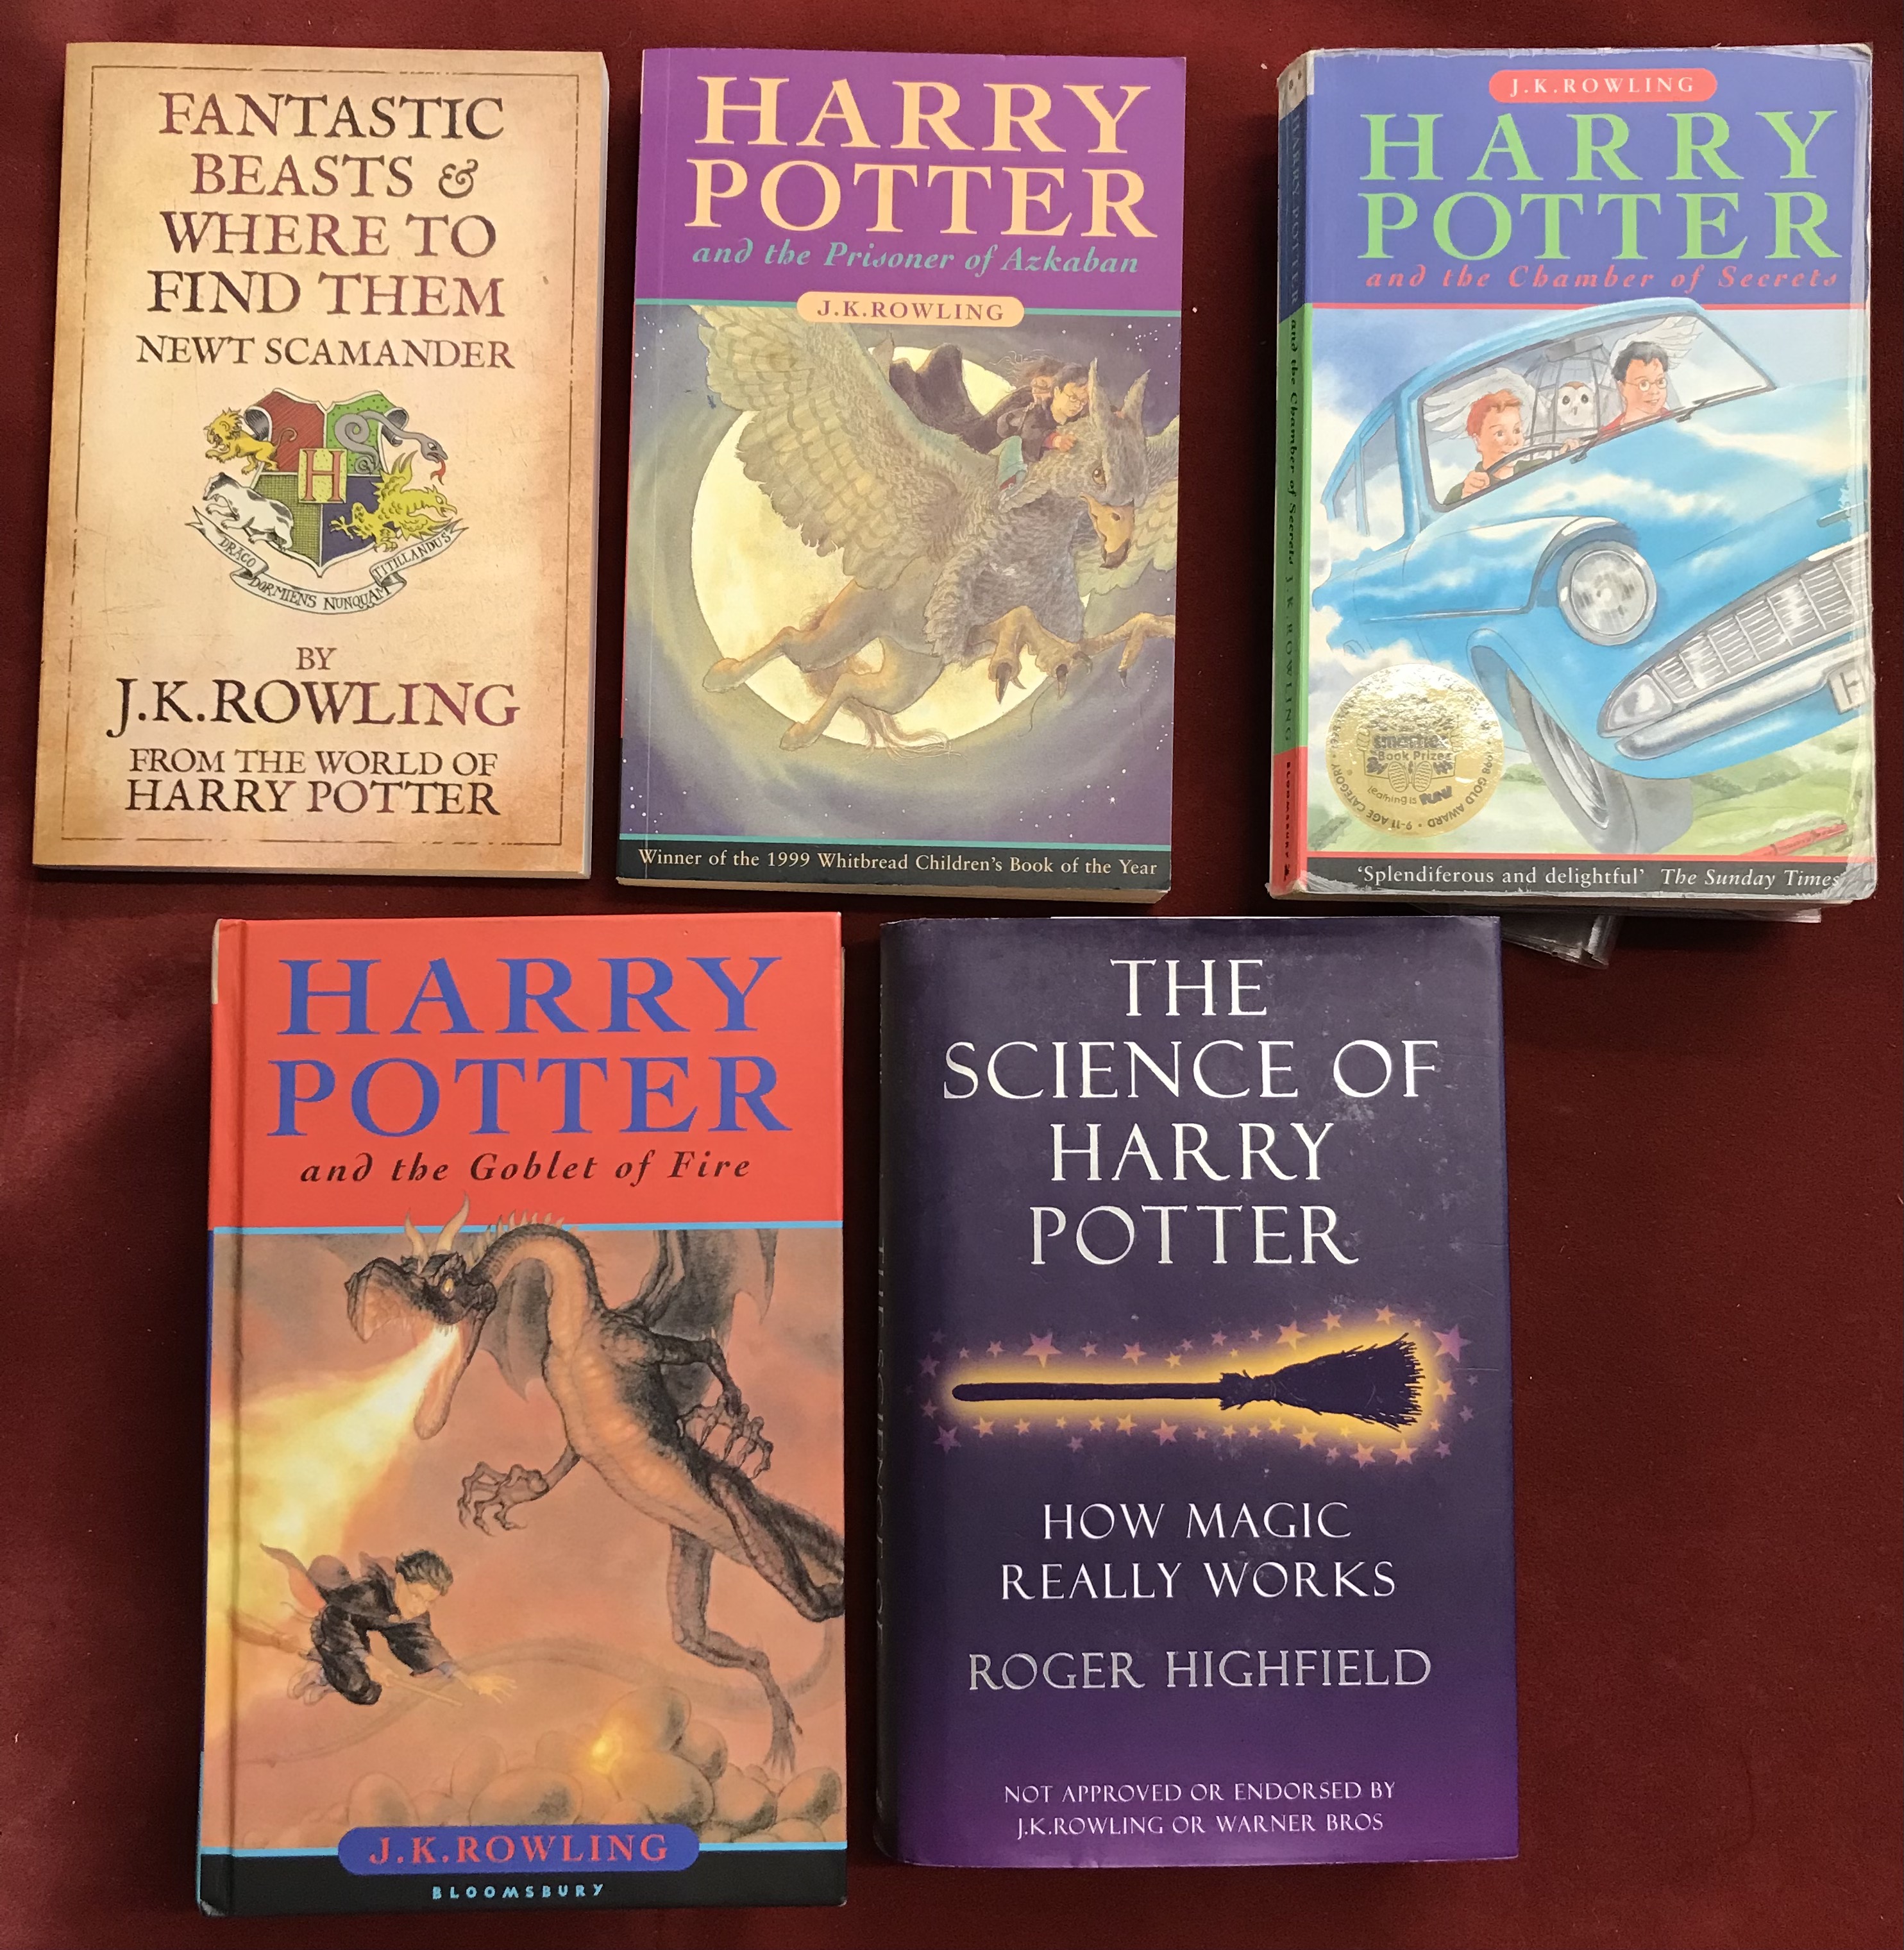 The Science of Harry Potter by Roger Highfield hardback, Harry Potter and the Goblet of Fire (has